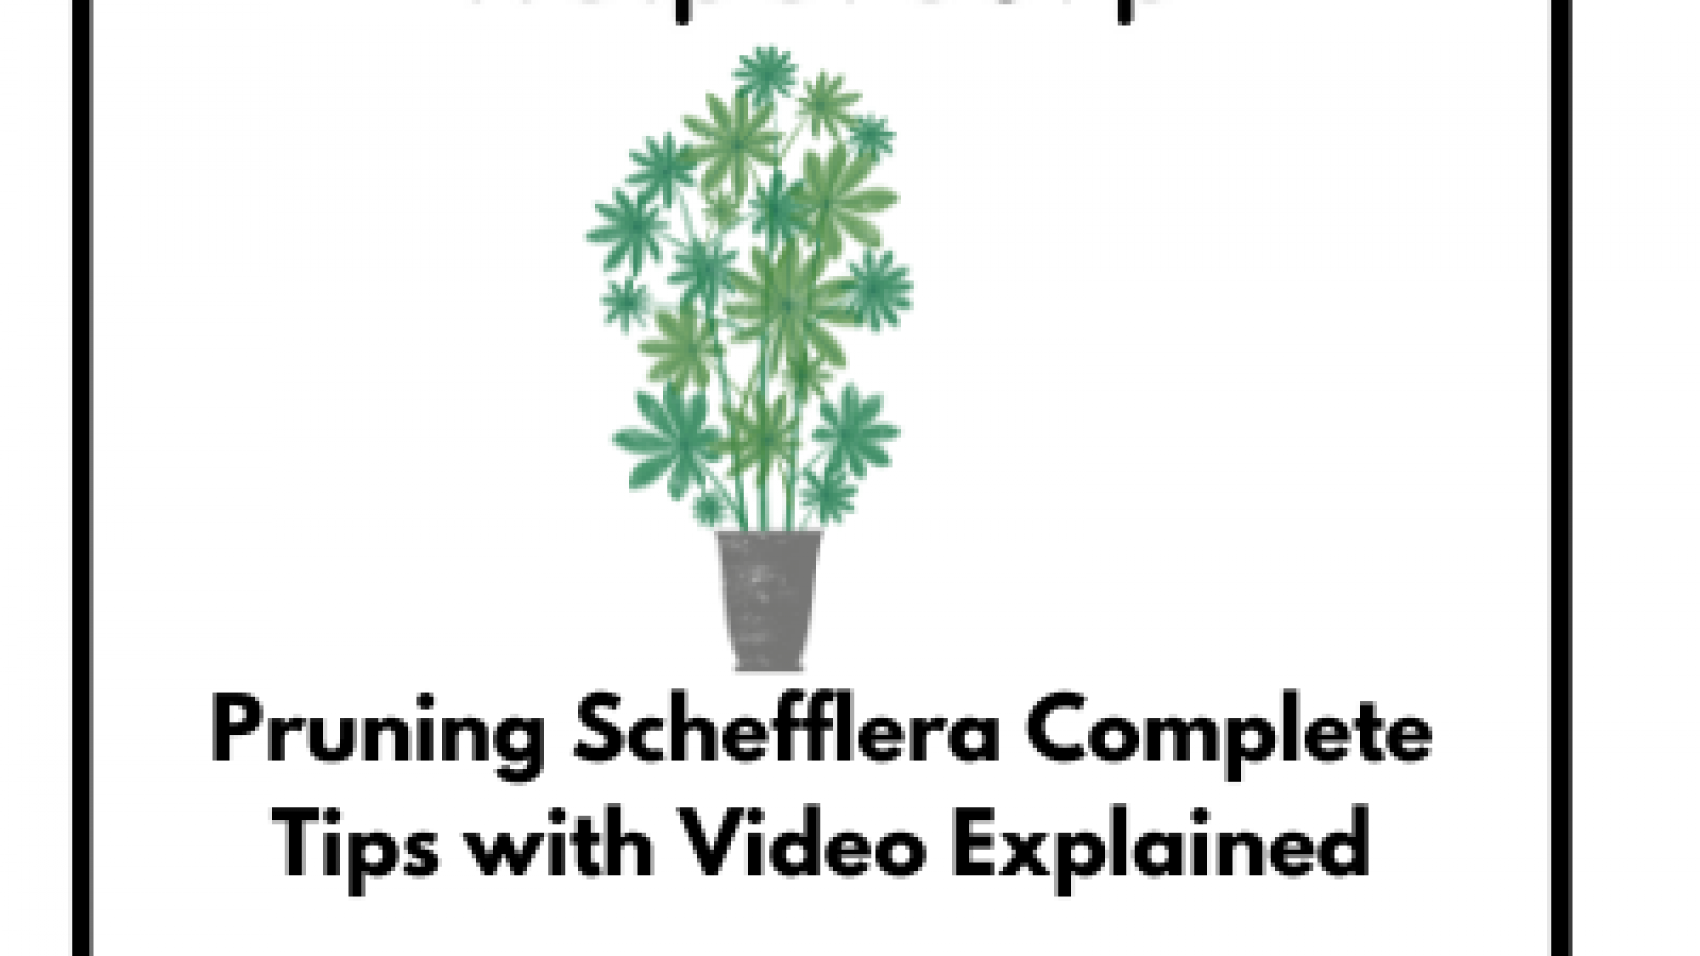 Pruning Schefflera Complete Tips with Video Explained